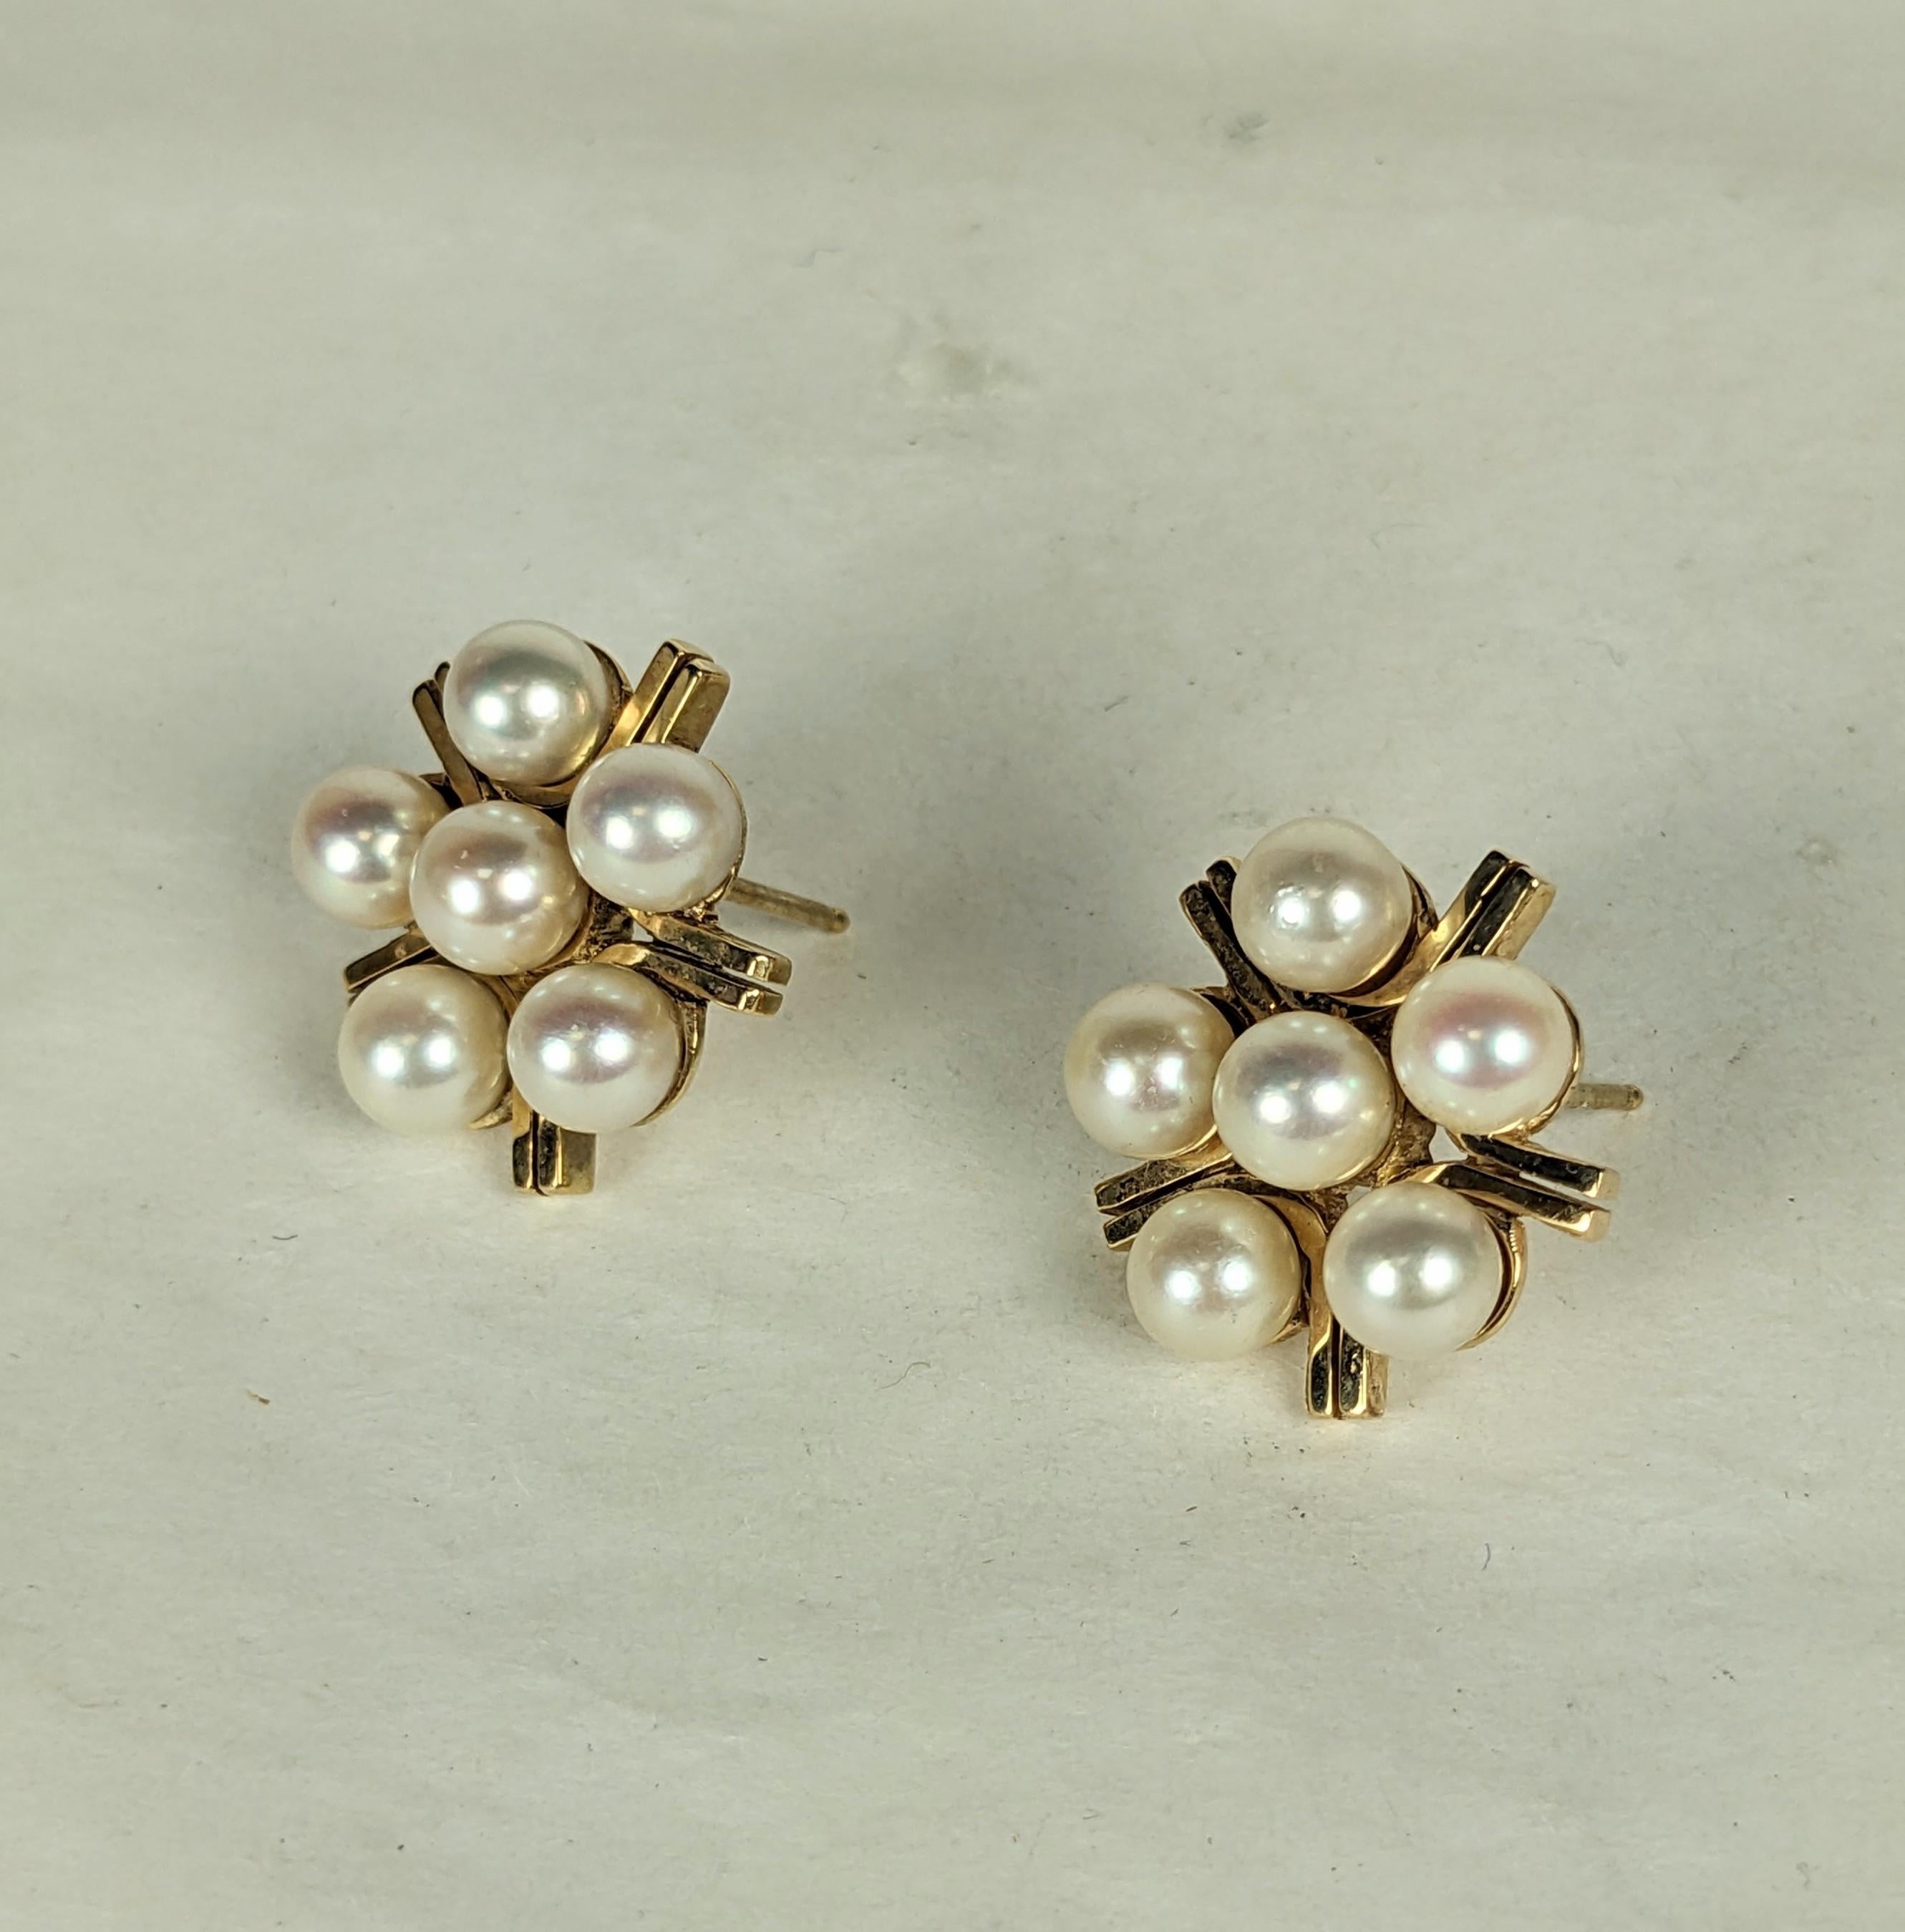 Classic cultured Pearl Star Form Earrings set in 14k gold. 6 cultured pearls are set within a star form frame of heavy gold. High quality manufacture. .75